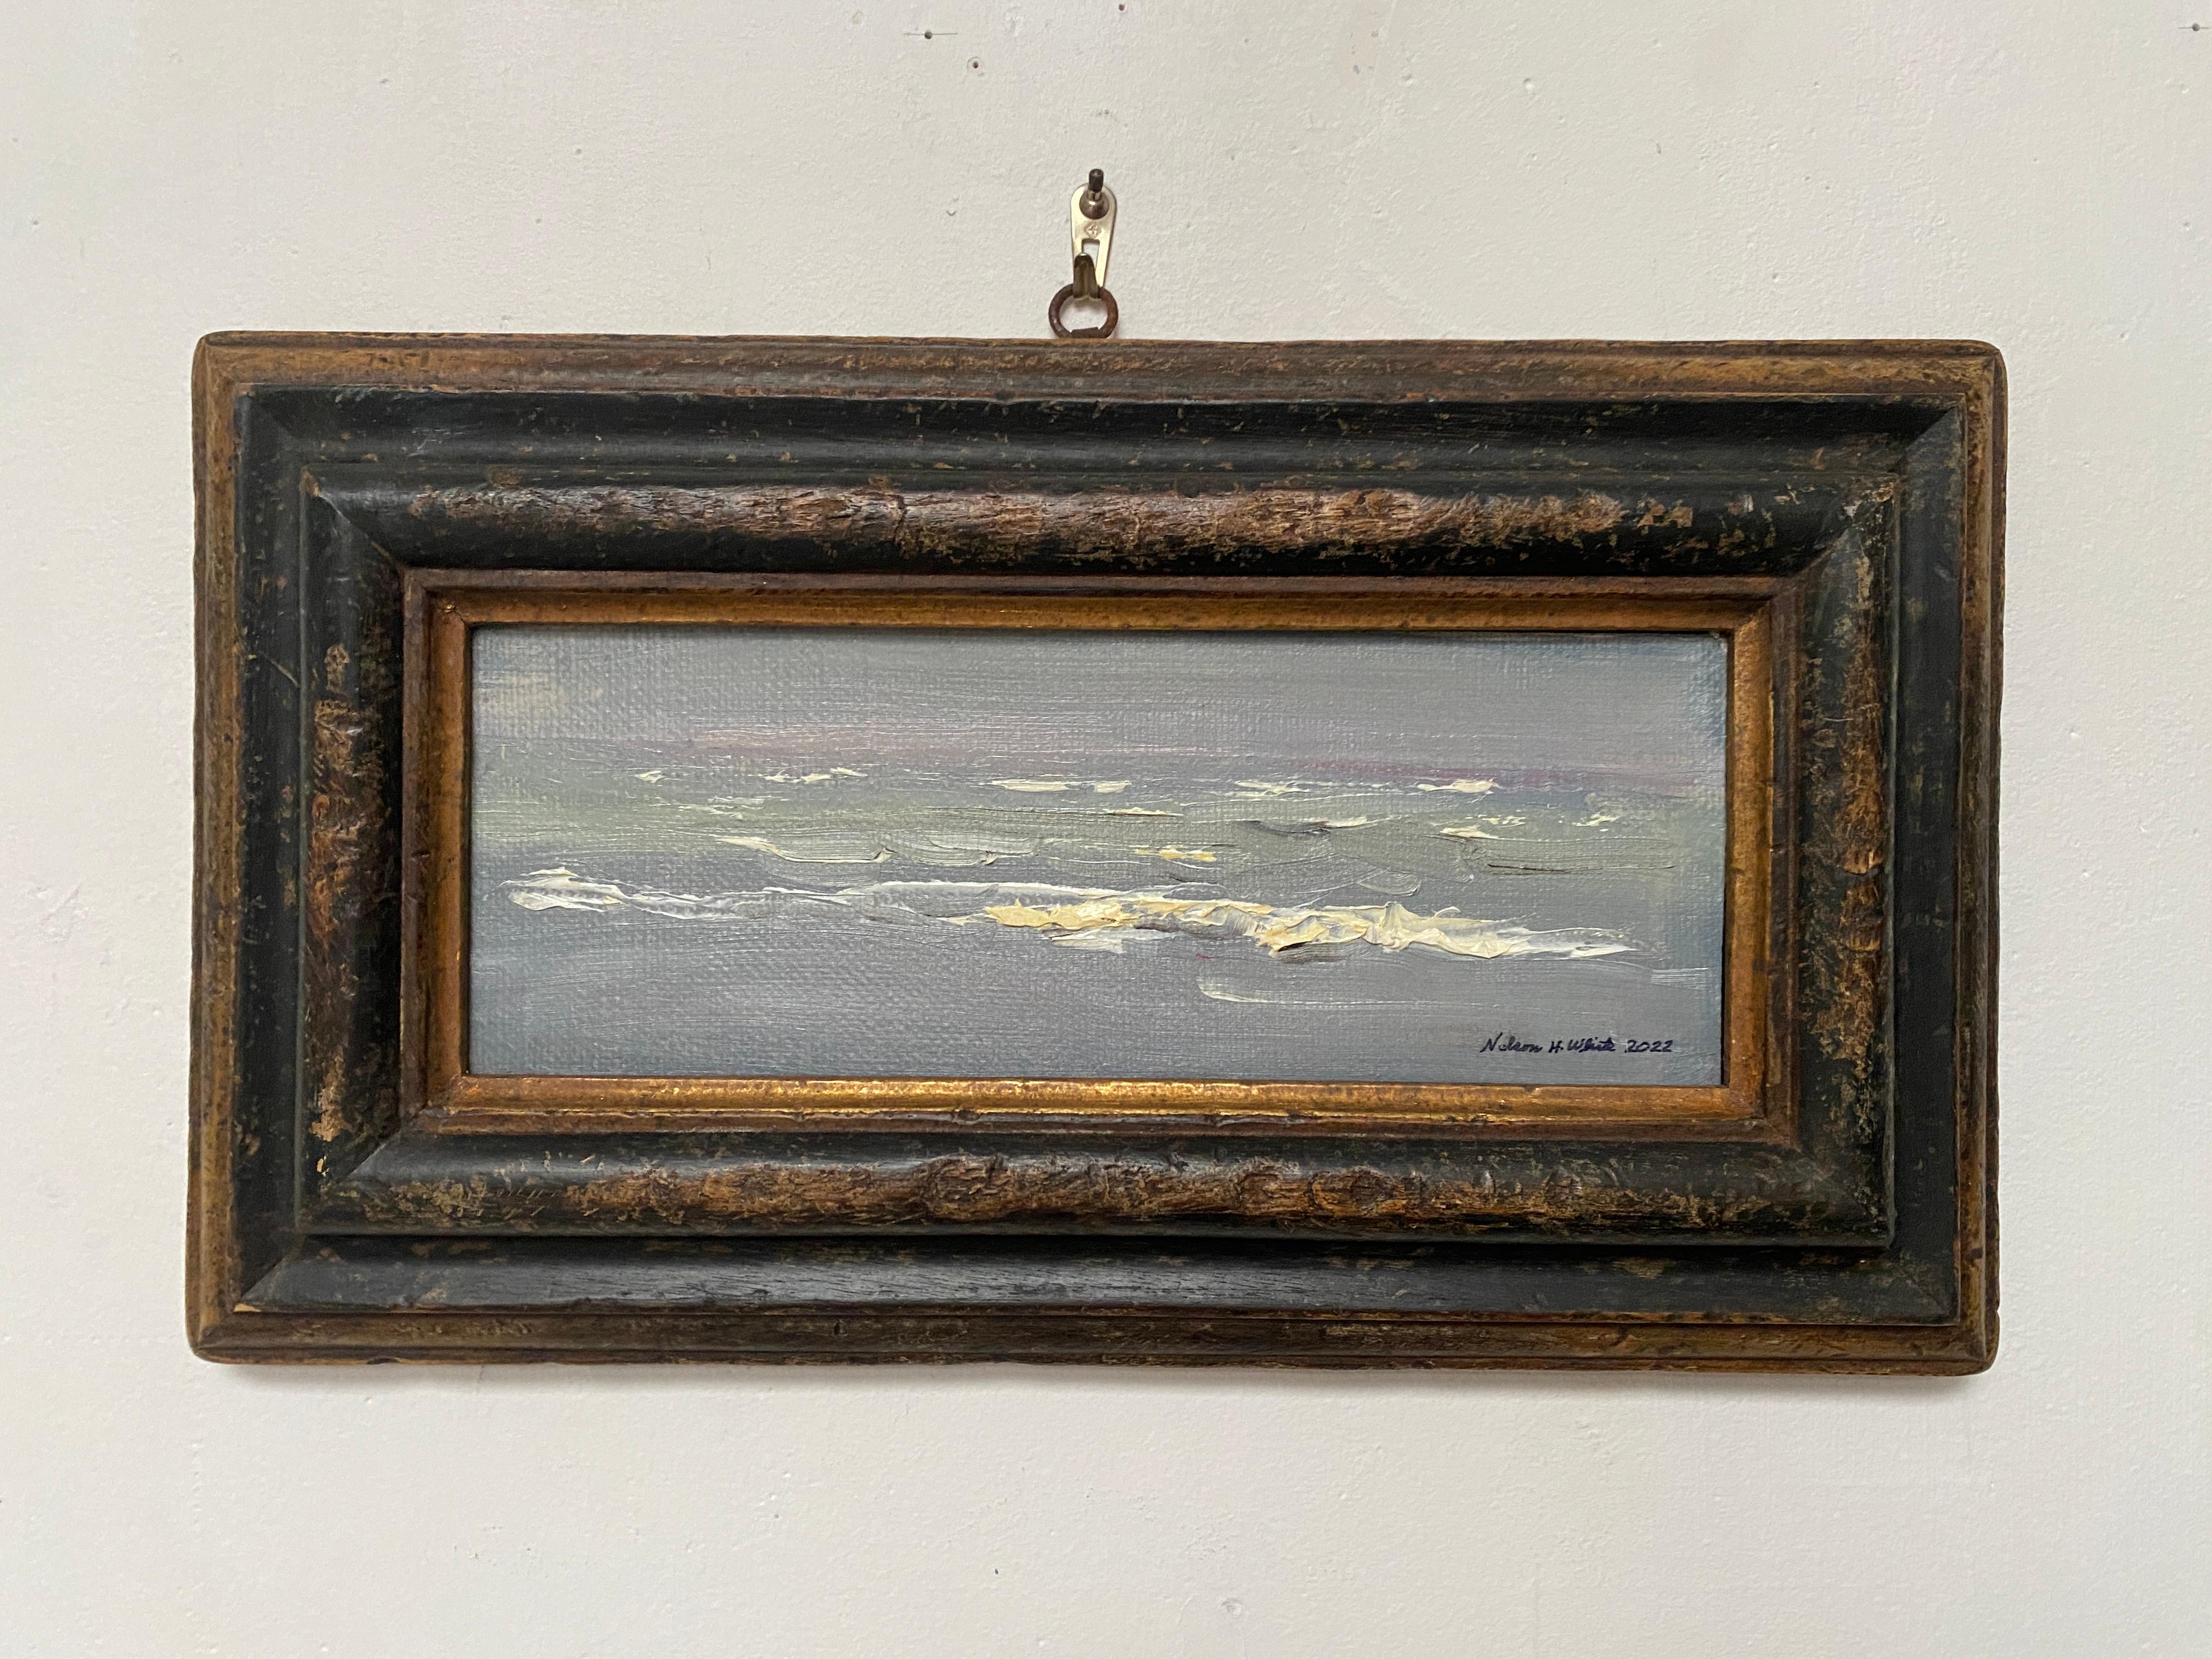 A close study of the warm September waves on Long Island. 

Framed Dimensions: 9.5 x 16.5 inches
Antique custom wood frame - made in Italy
Top-loop hardware

Artist Bio
Nelson H. White was born in New London, Connecticut in 1932. White has been